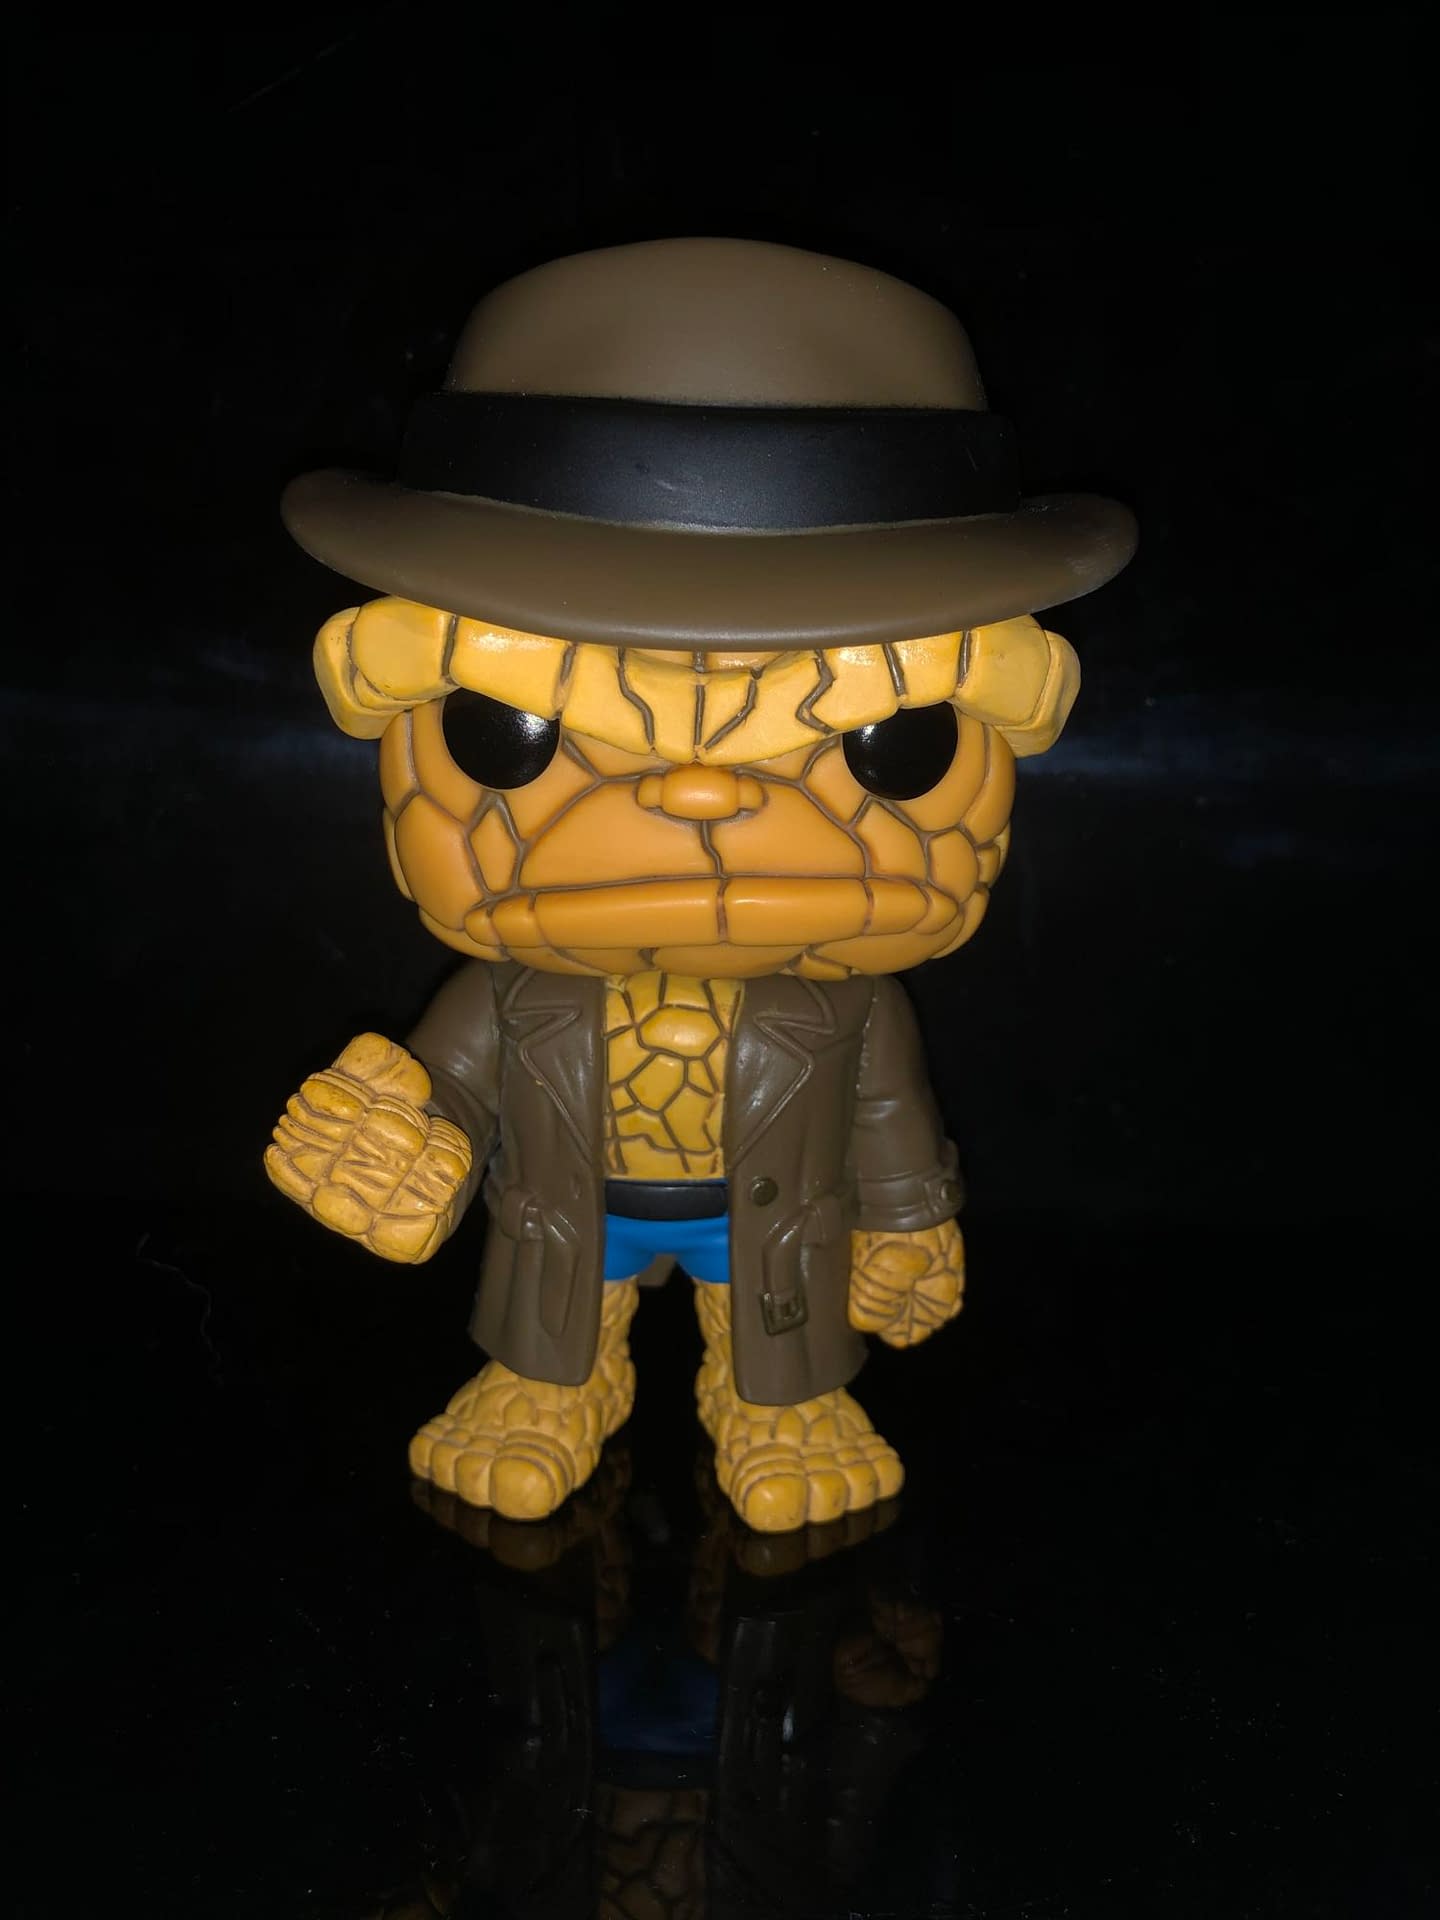 The Thing Gets a Disguise with New Fantastic Four Funko Pop